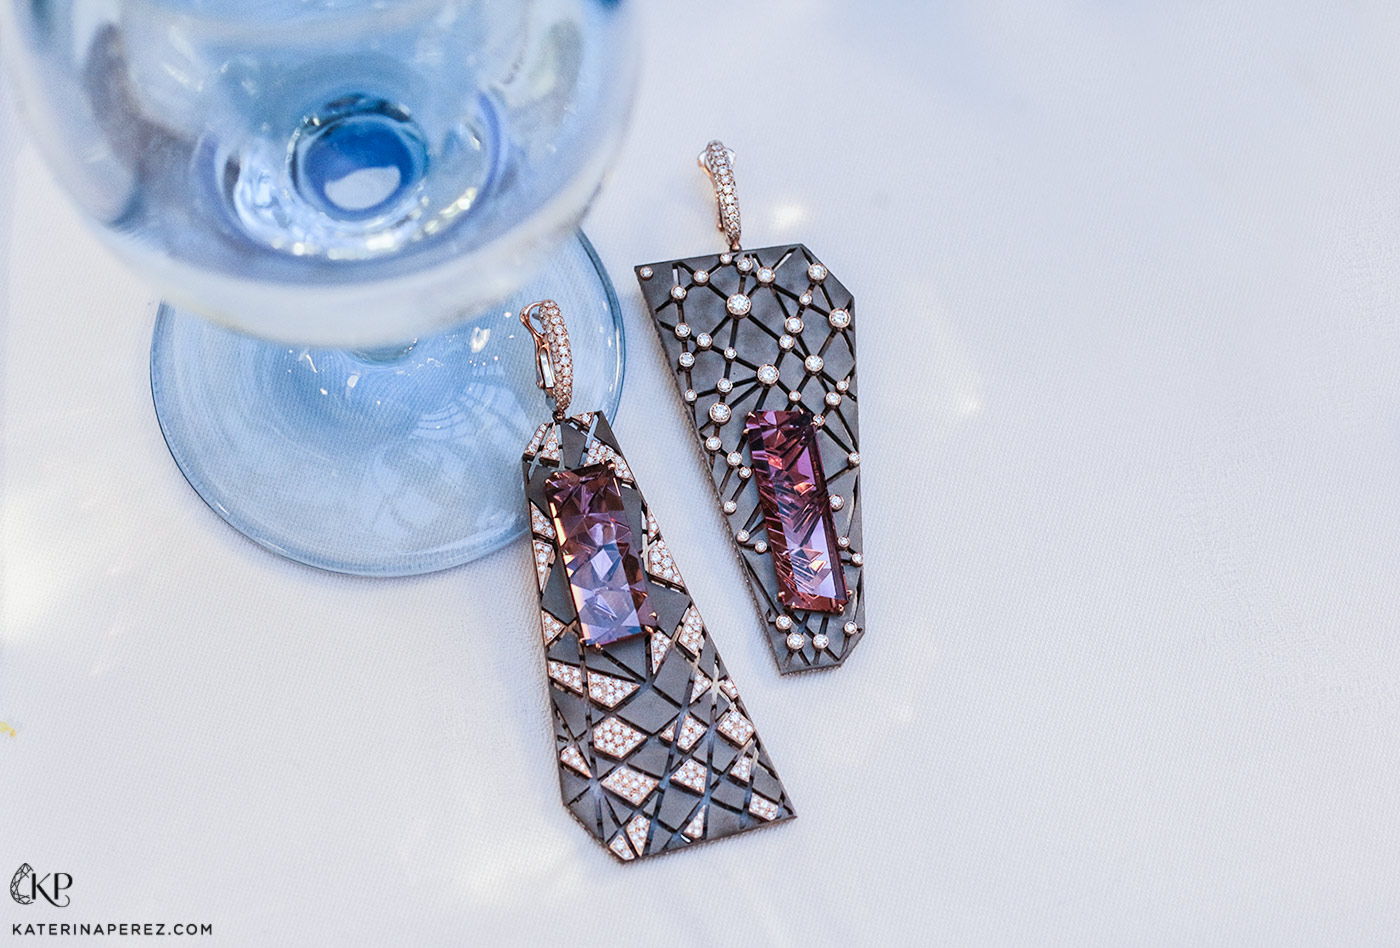 VMAR 'Orion &Auriga' earrings with fancy cut pink tourmalines of 17.50ct and 17.60ct, and diamonds in pink gold and titanium